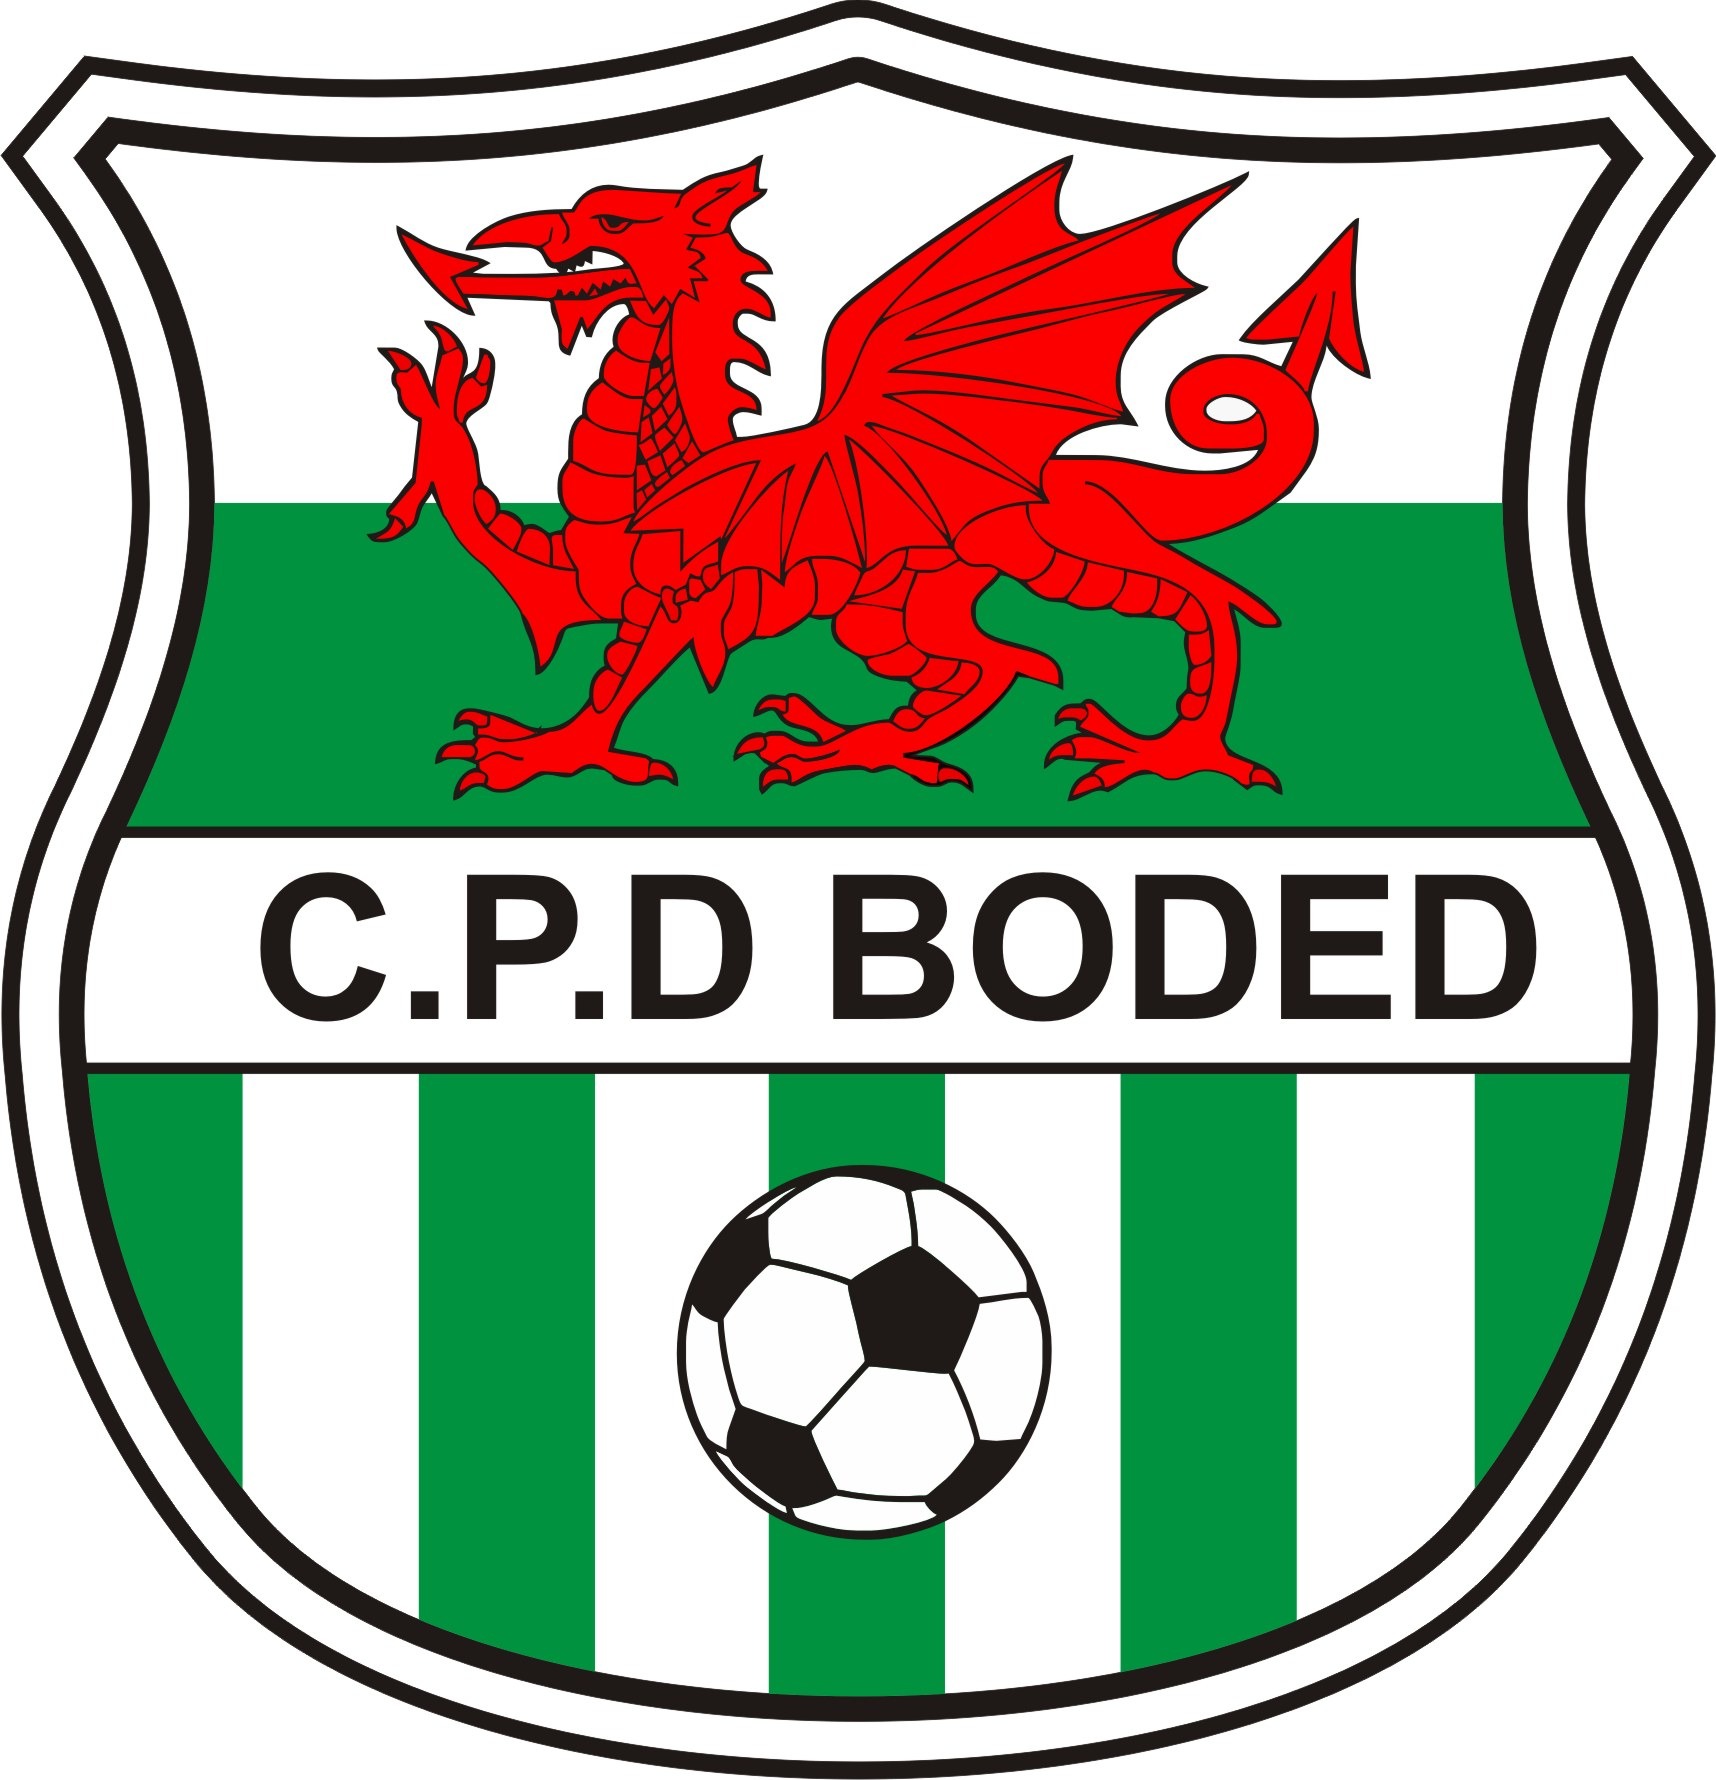 C.P.D Boded